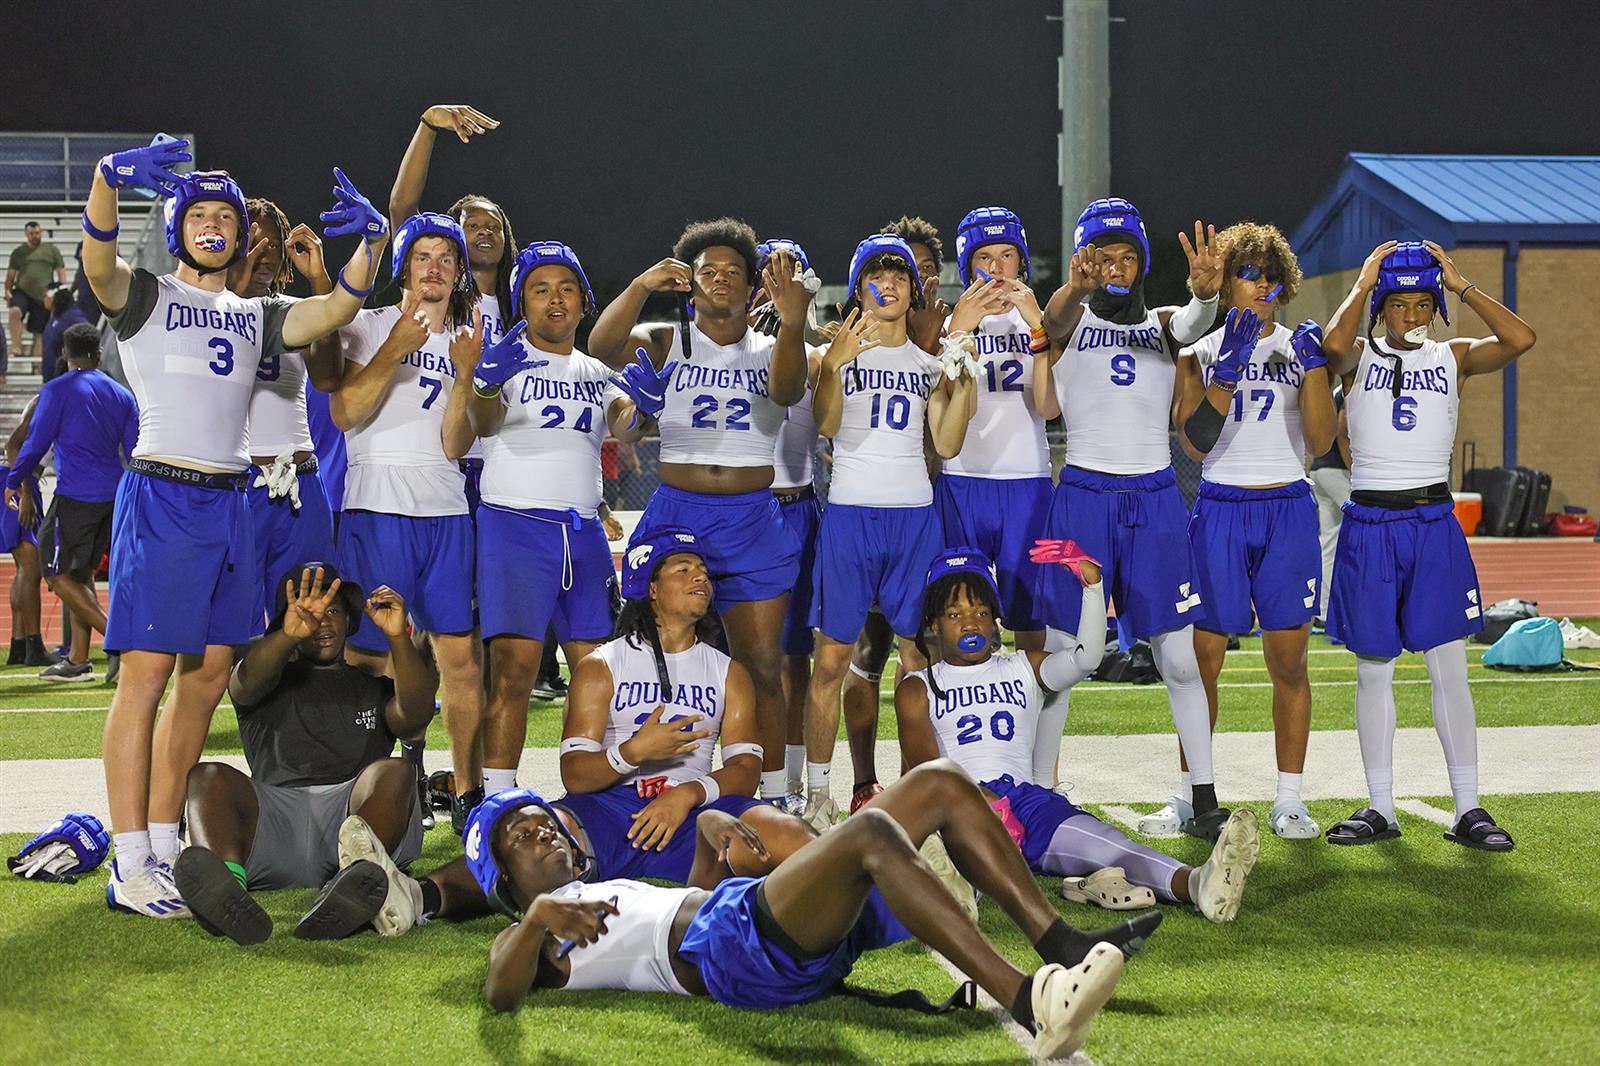 The Cypress Creek High School 7-on-7 football team qualified for the Texas 7-on-7 state tournament for the 14th time.